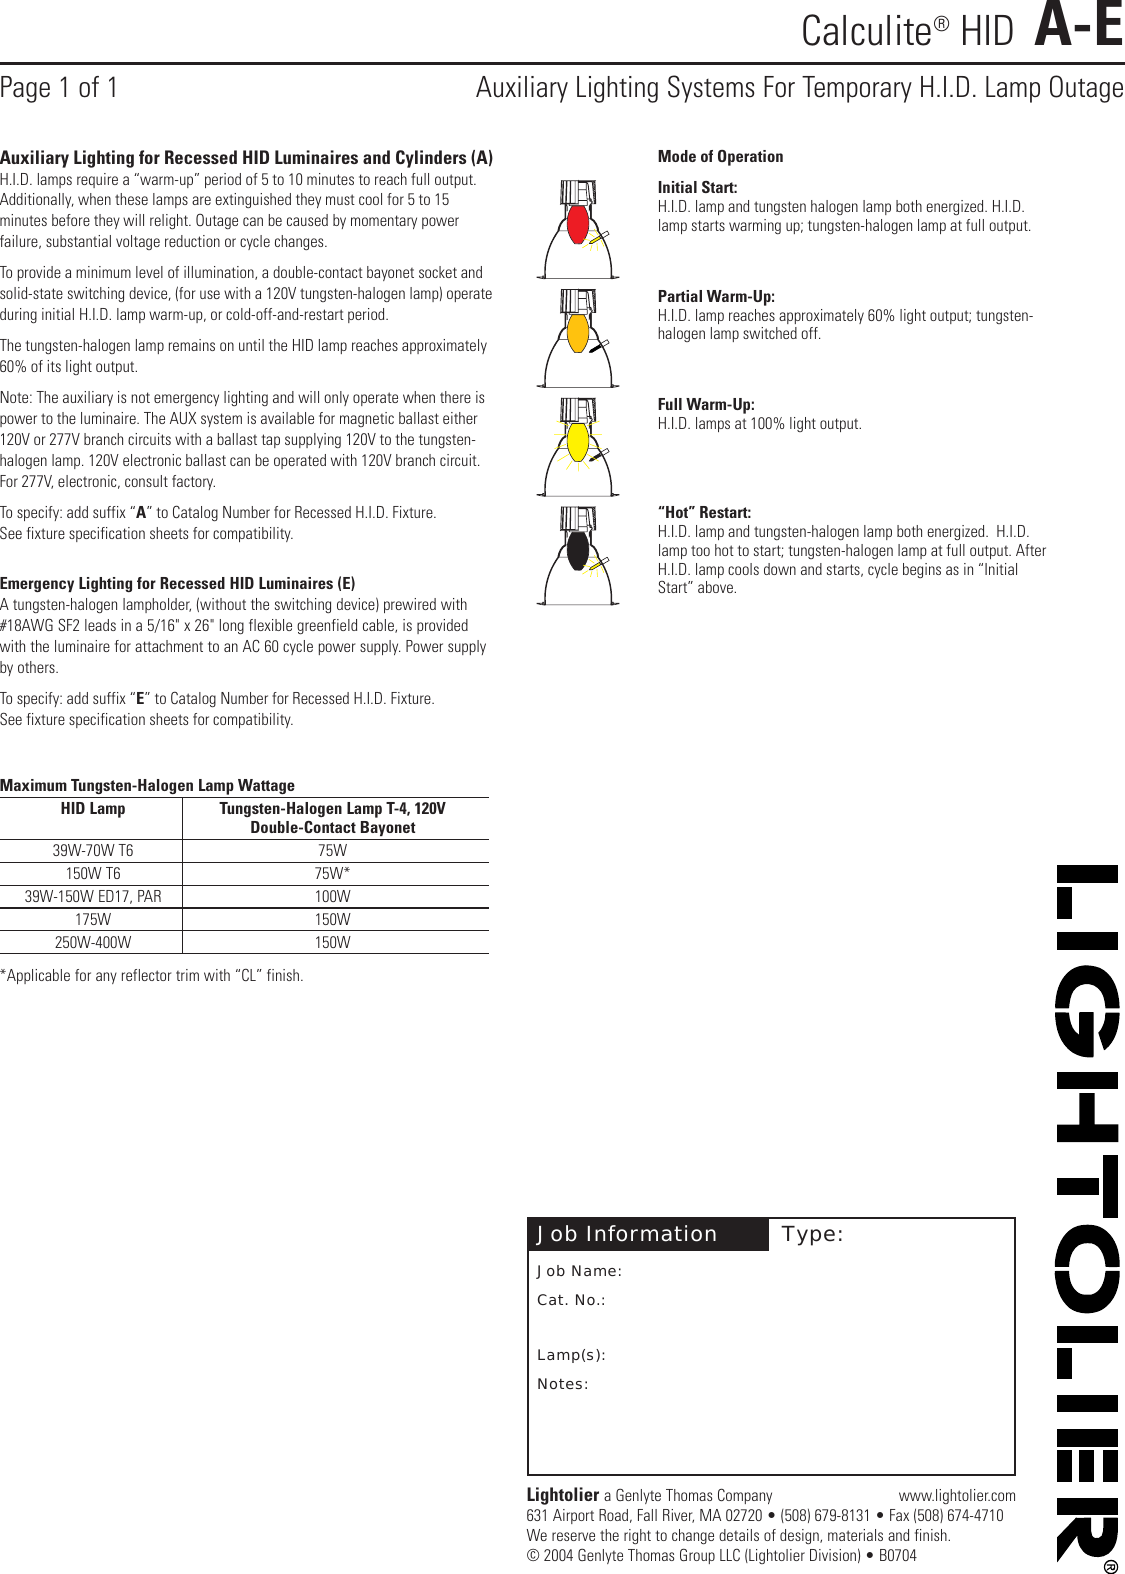 Page 1 of 1 - Lightolier Lightolier-Calculite-Recessed-Fluorescent-Downlight-A-E-Users-Manual- A-E  Lightolier-calculite-recessed-fluorescent-downlight-a-e-users-manual